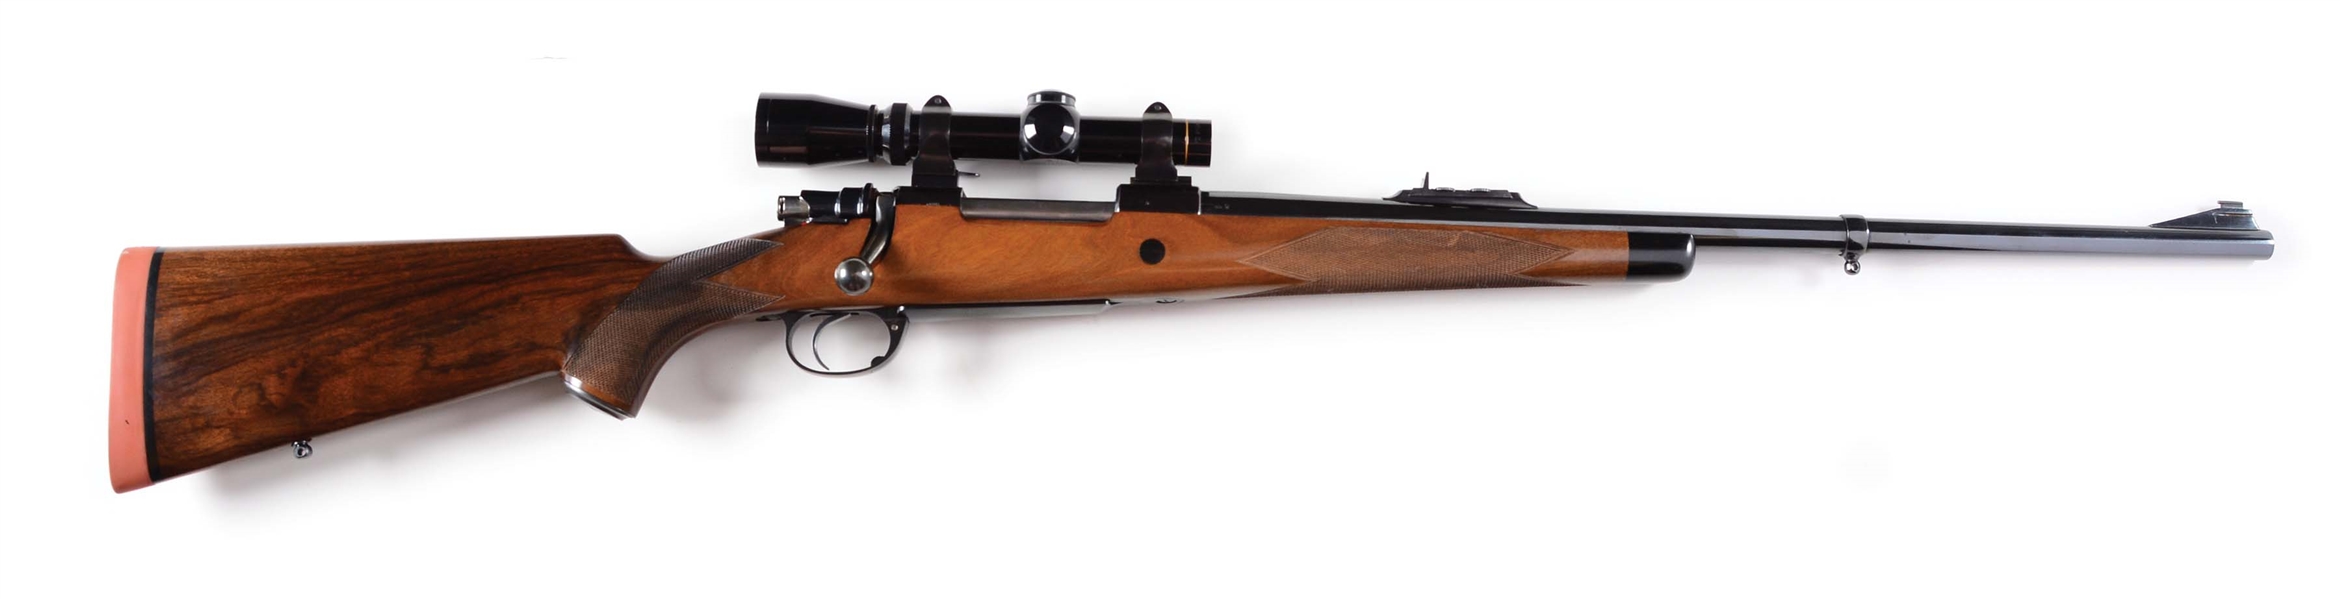 (M) ENGLISH MADE INTERARMS WHITWORTH EXPRESS RIFLE WITH SCOPE